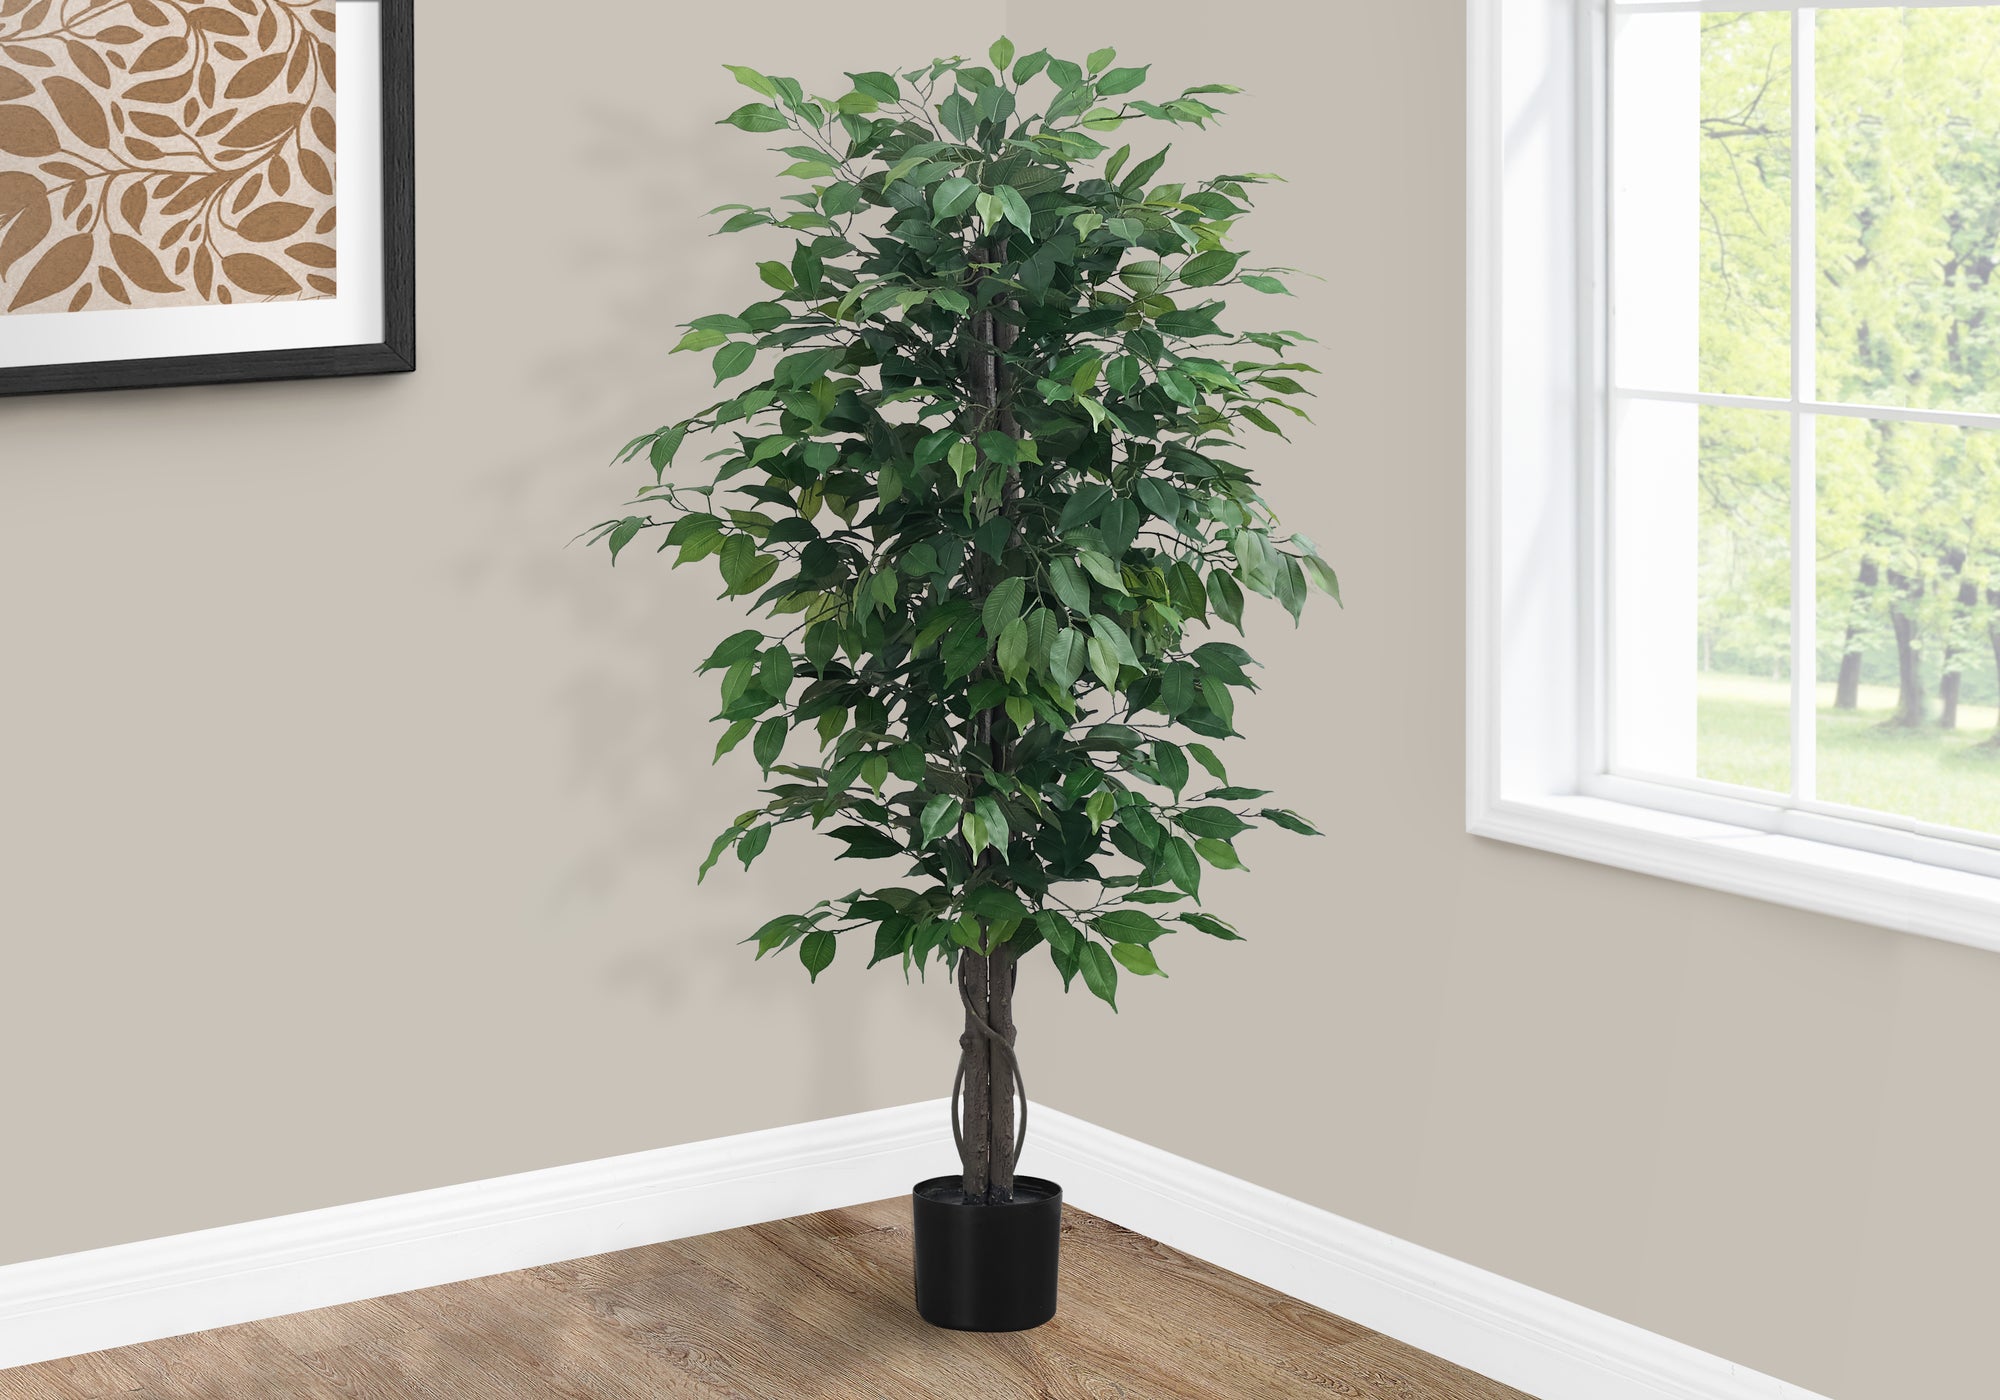 MN-579564    Artificial Plant, 58" Tall, Ficus Tree, Indoor, Faux, Fake, Floor, Greenery, Potted, Decorative, Green Leaves, Black Pot